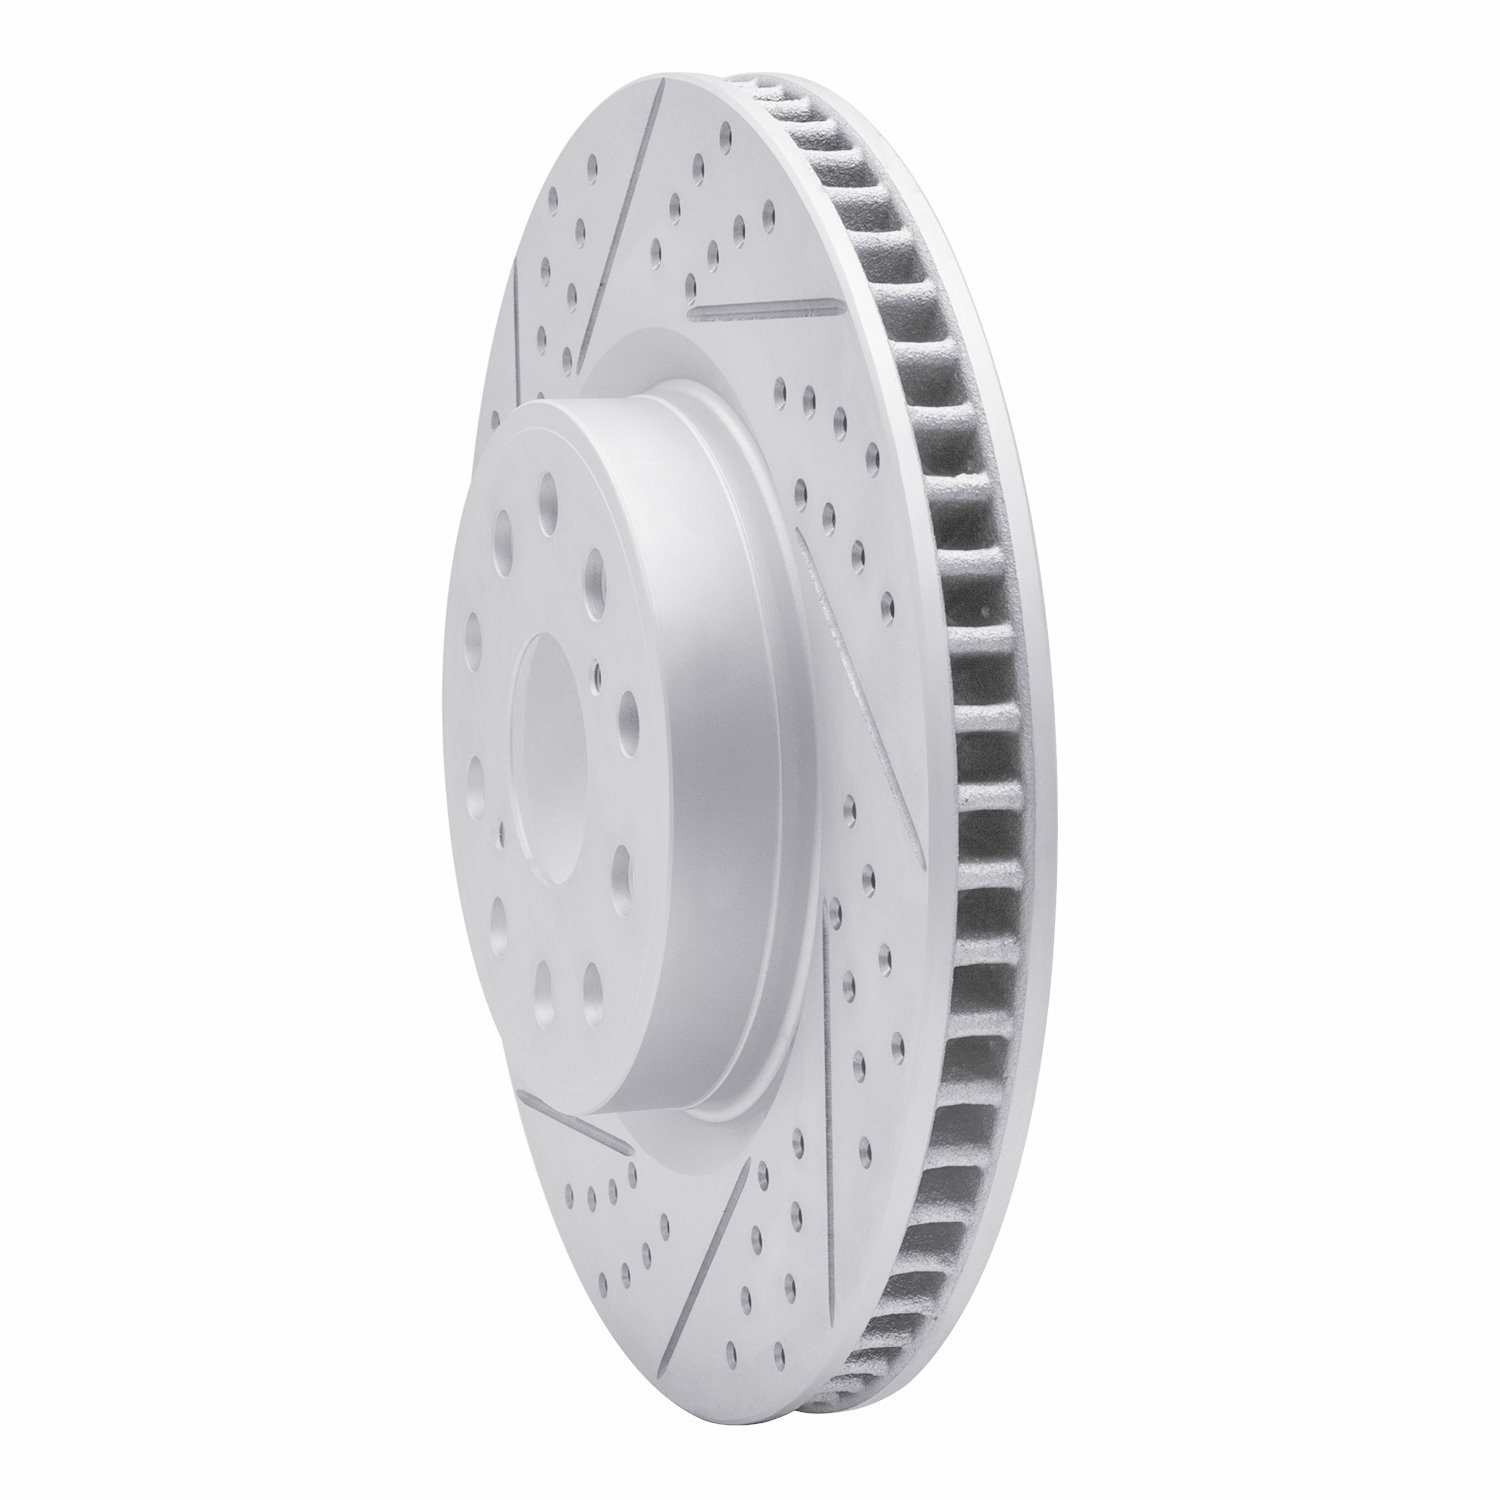 830-75017L Geoperformance Drilled/Slotted Brake Rotor, Fits Select Lexus/Toyota/Scion, Position: Front Left